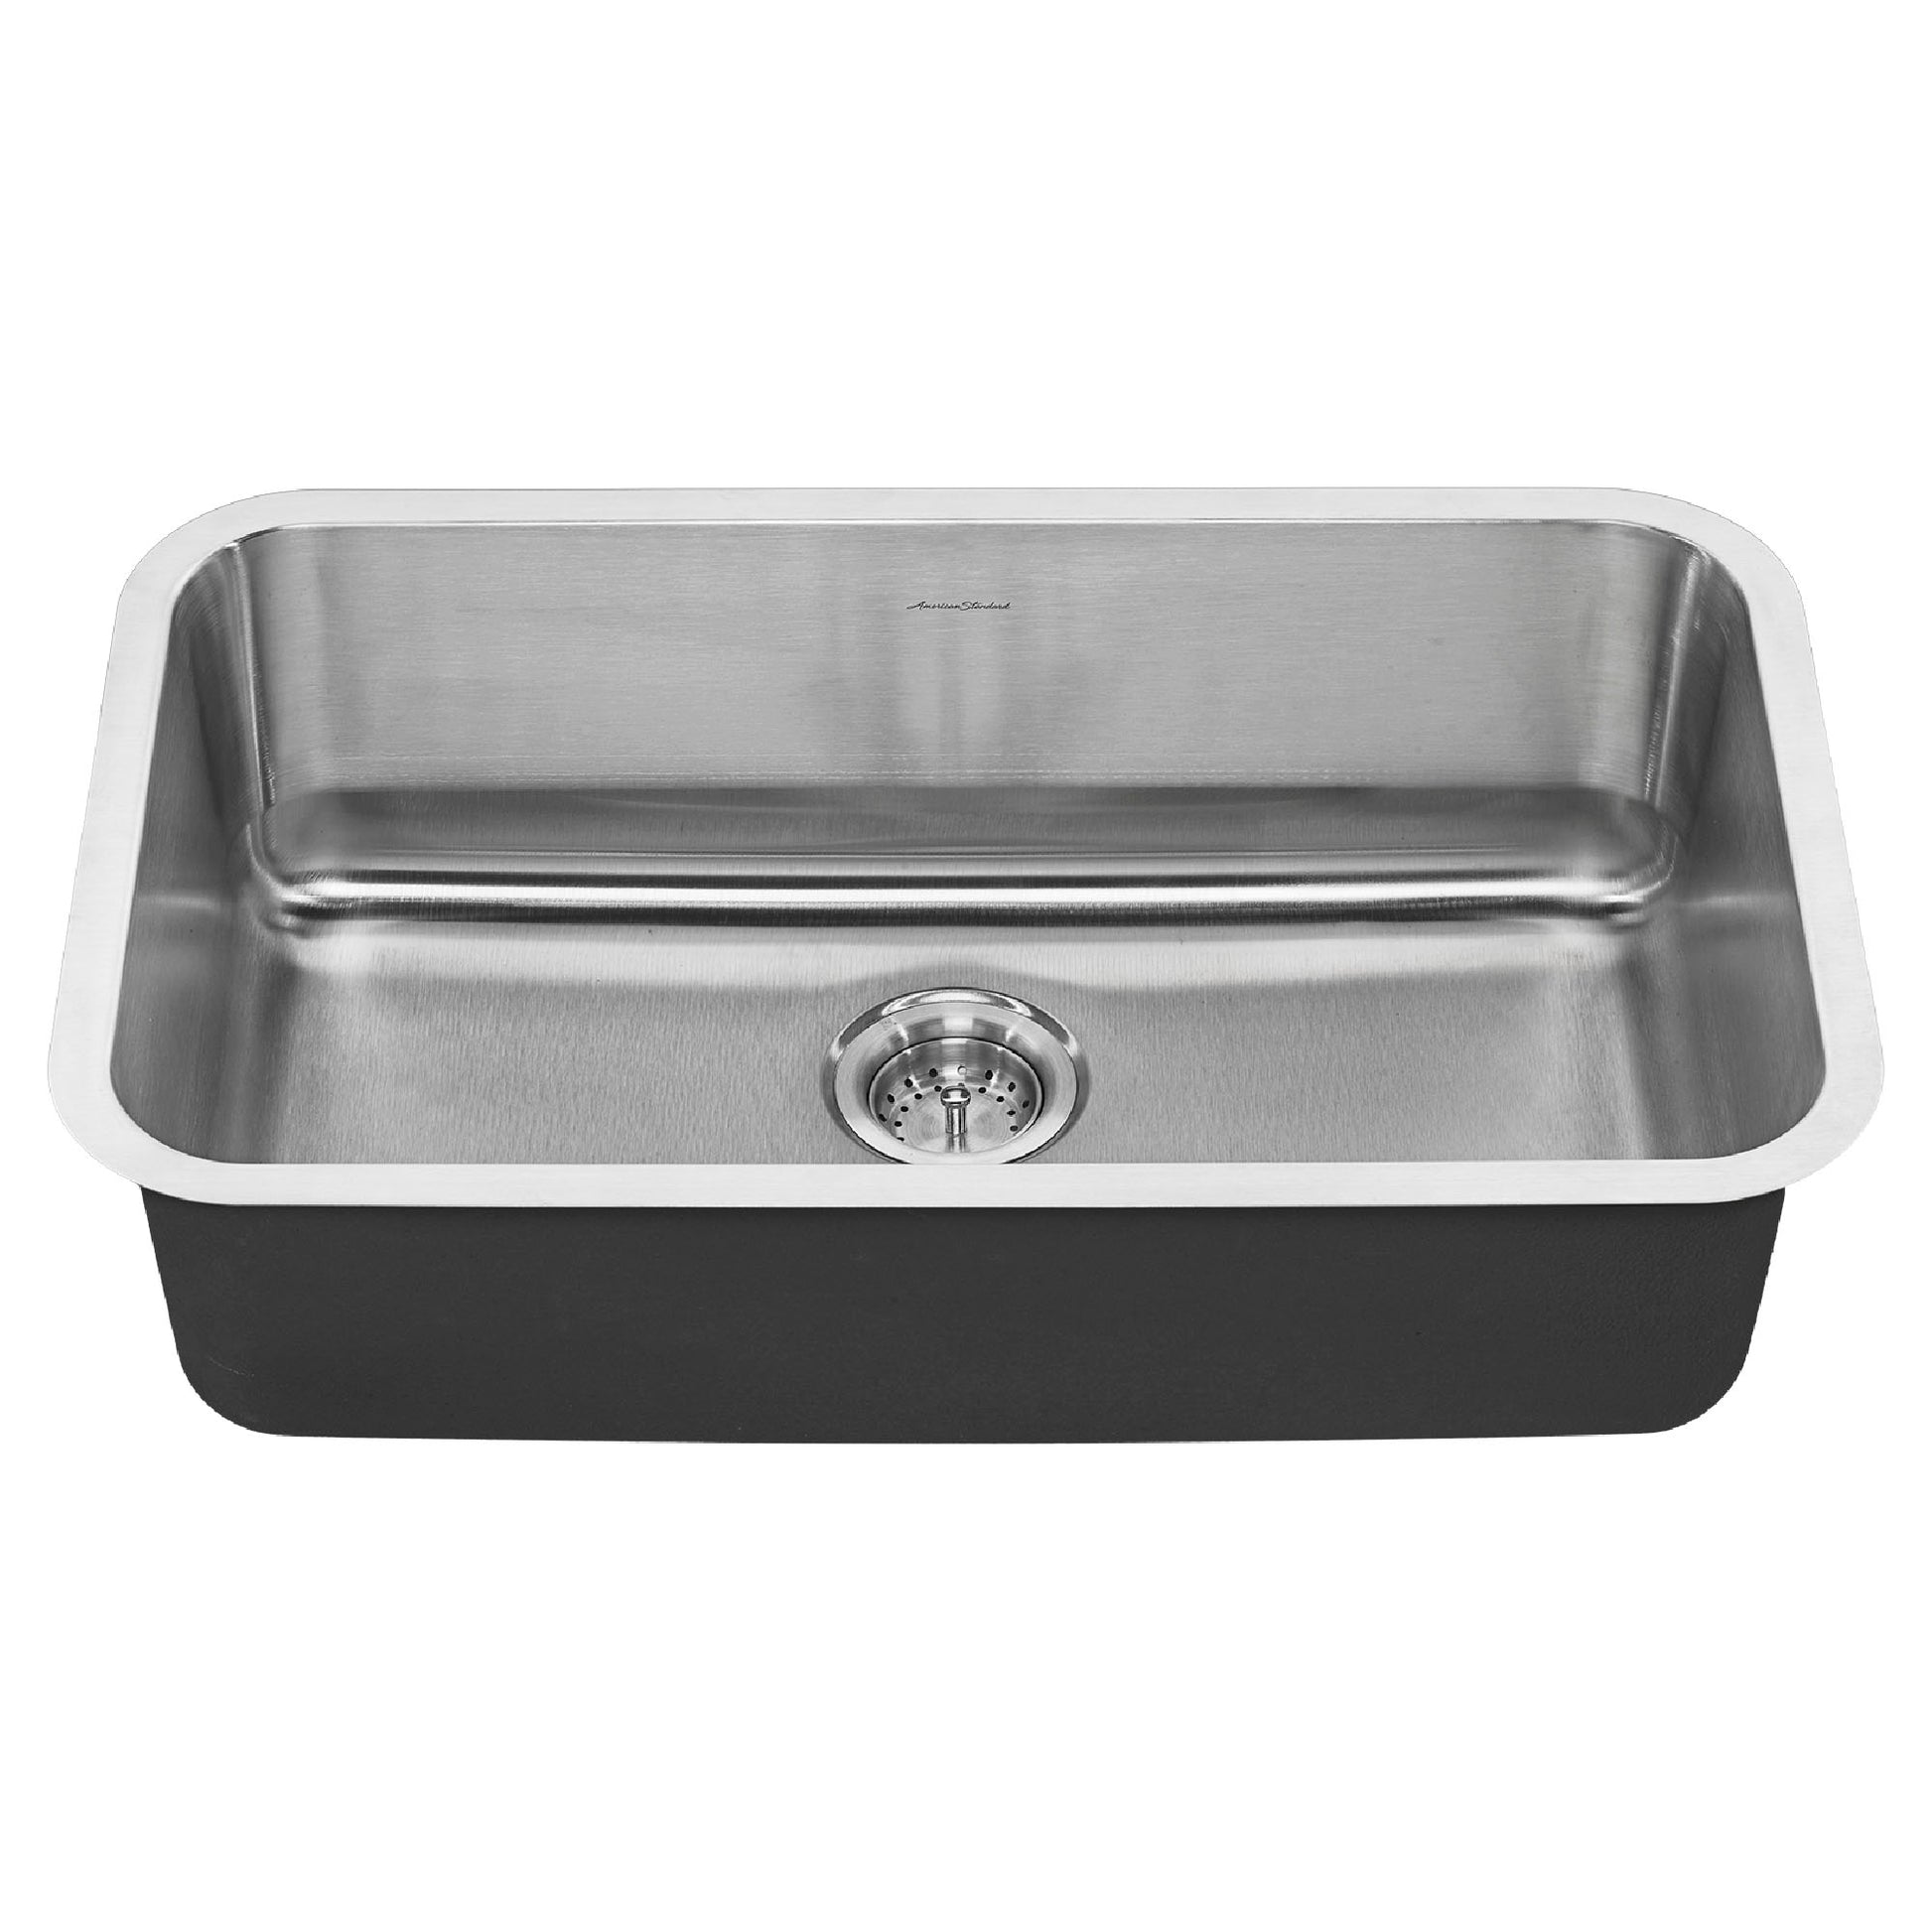 AMERICAN-STANDARD 18SB.9301800S.075, Portsmouth 30 x 18-Inch Stainless Steel Undermount Single-Bowl Kitchen Sink in Stainless Stl